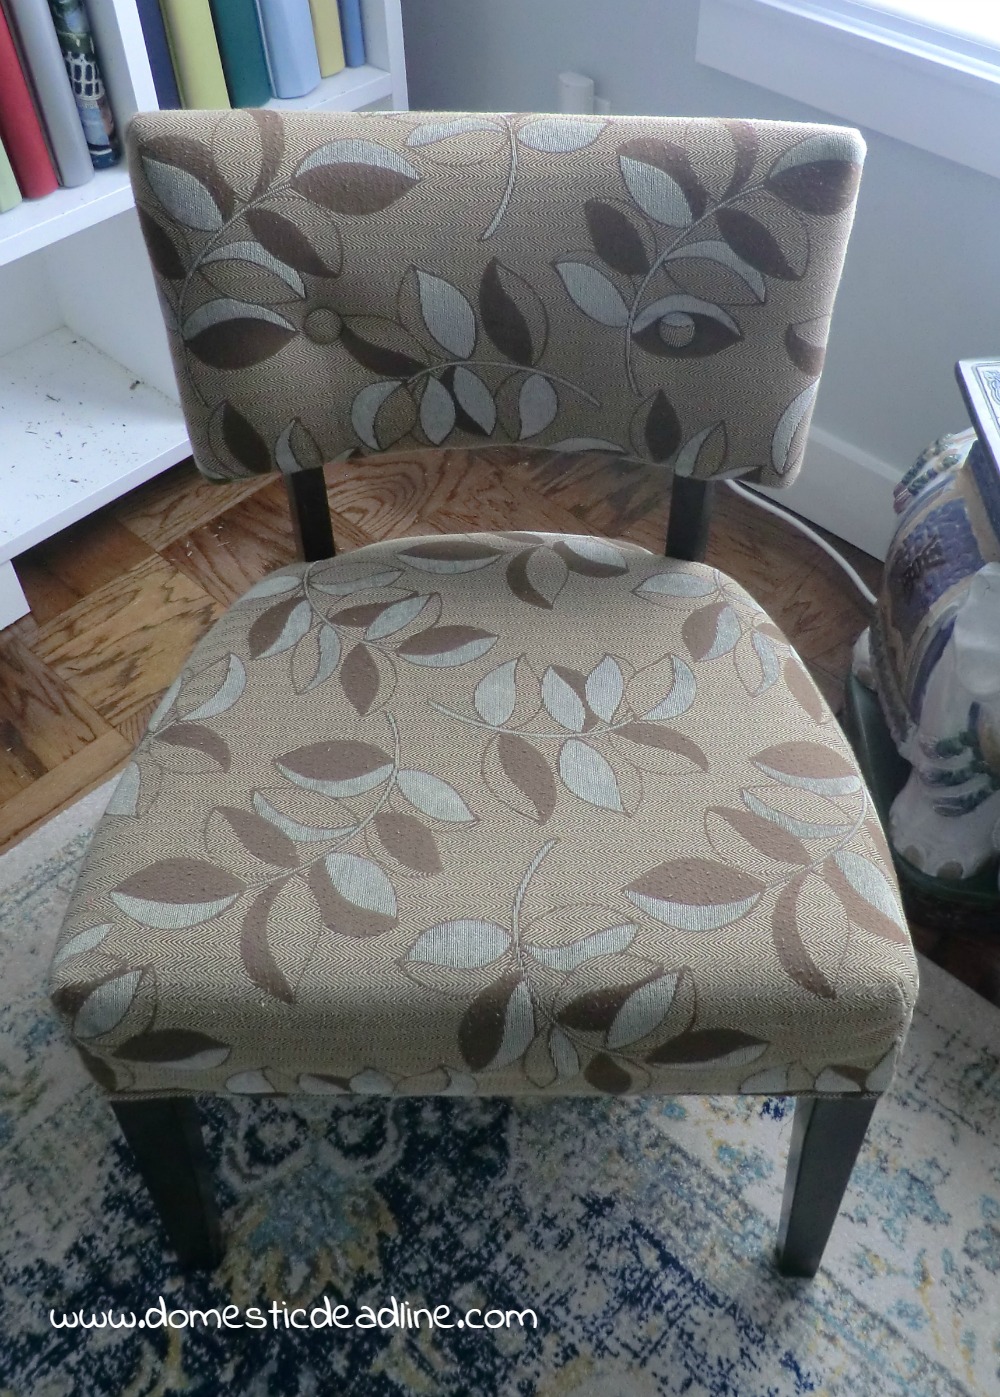 How to Upholster an Occasional Chair - A DIY Photo Tutorial - Part 1